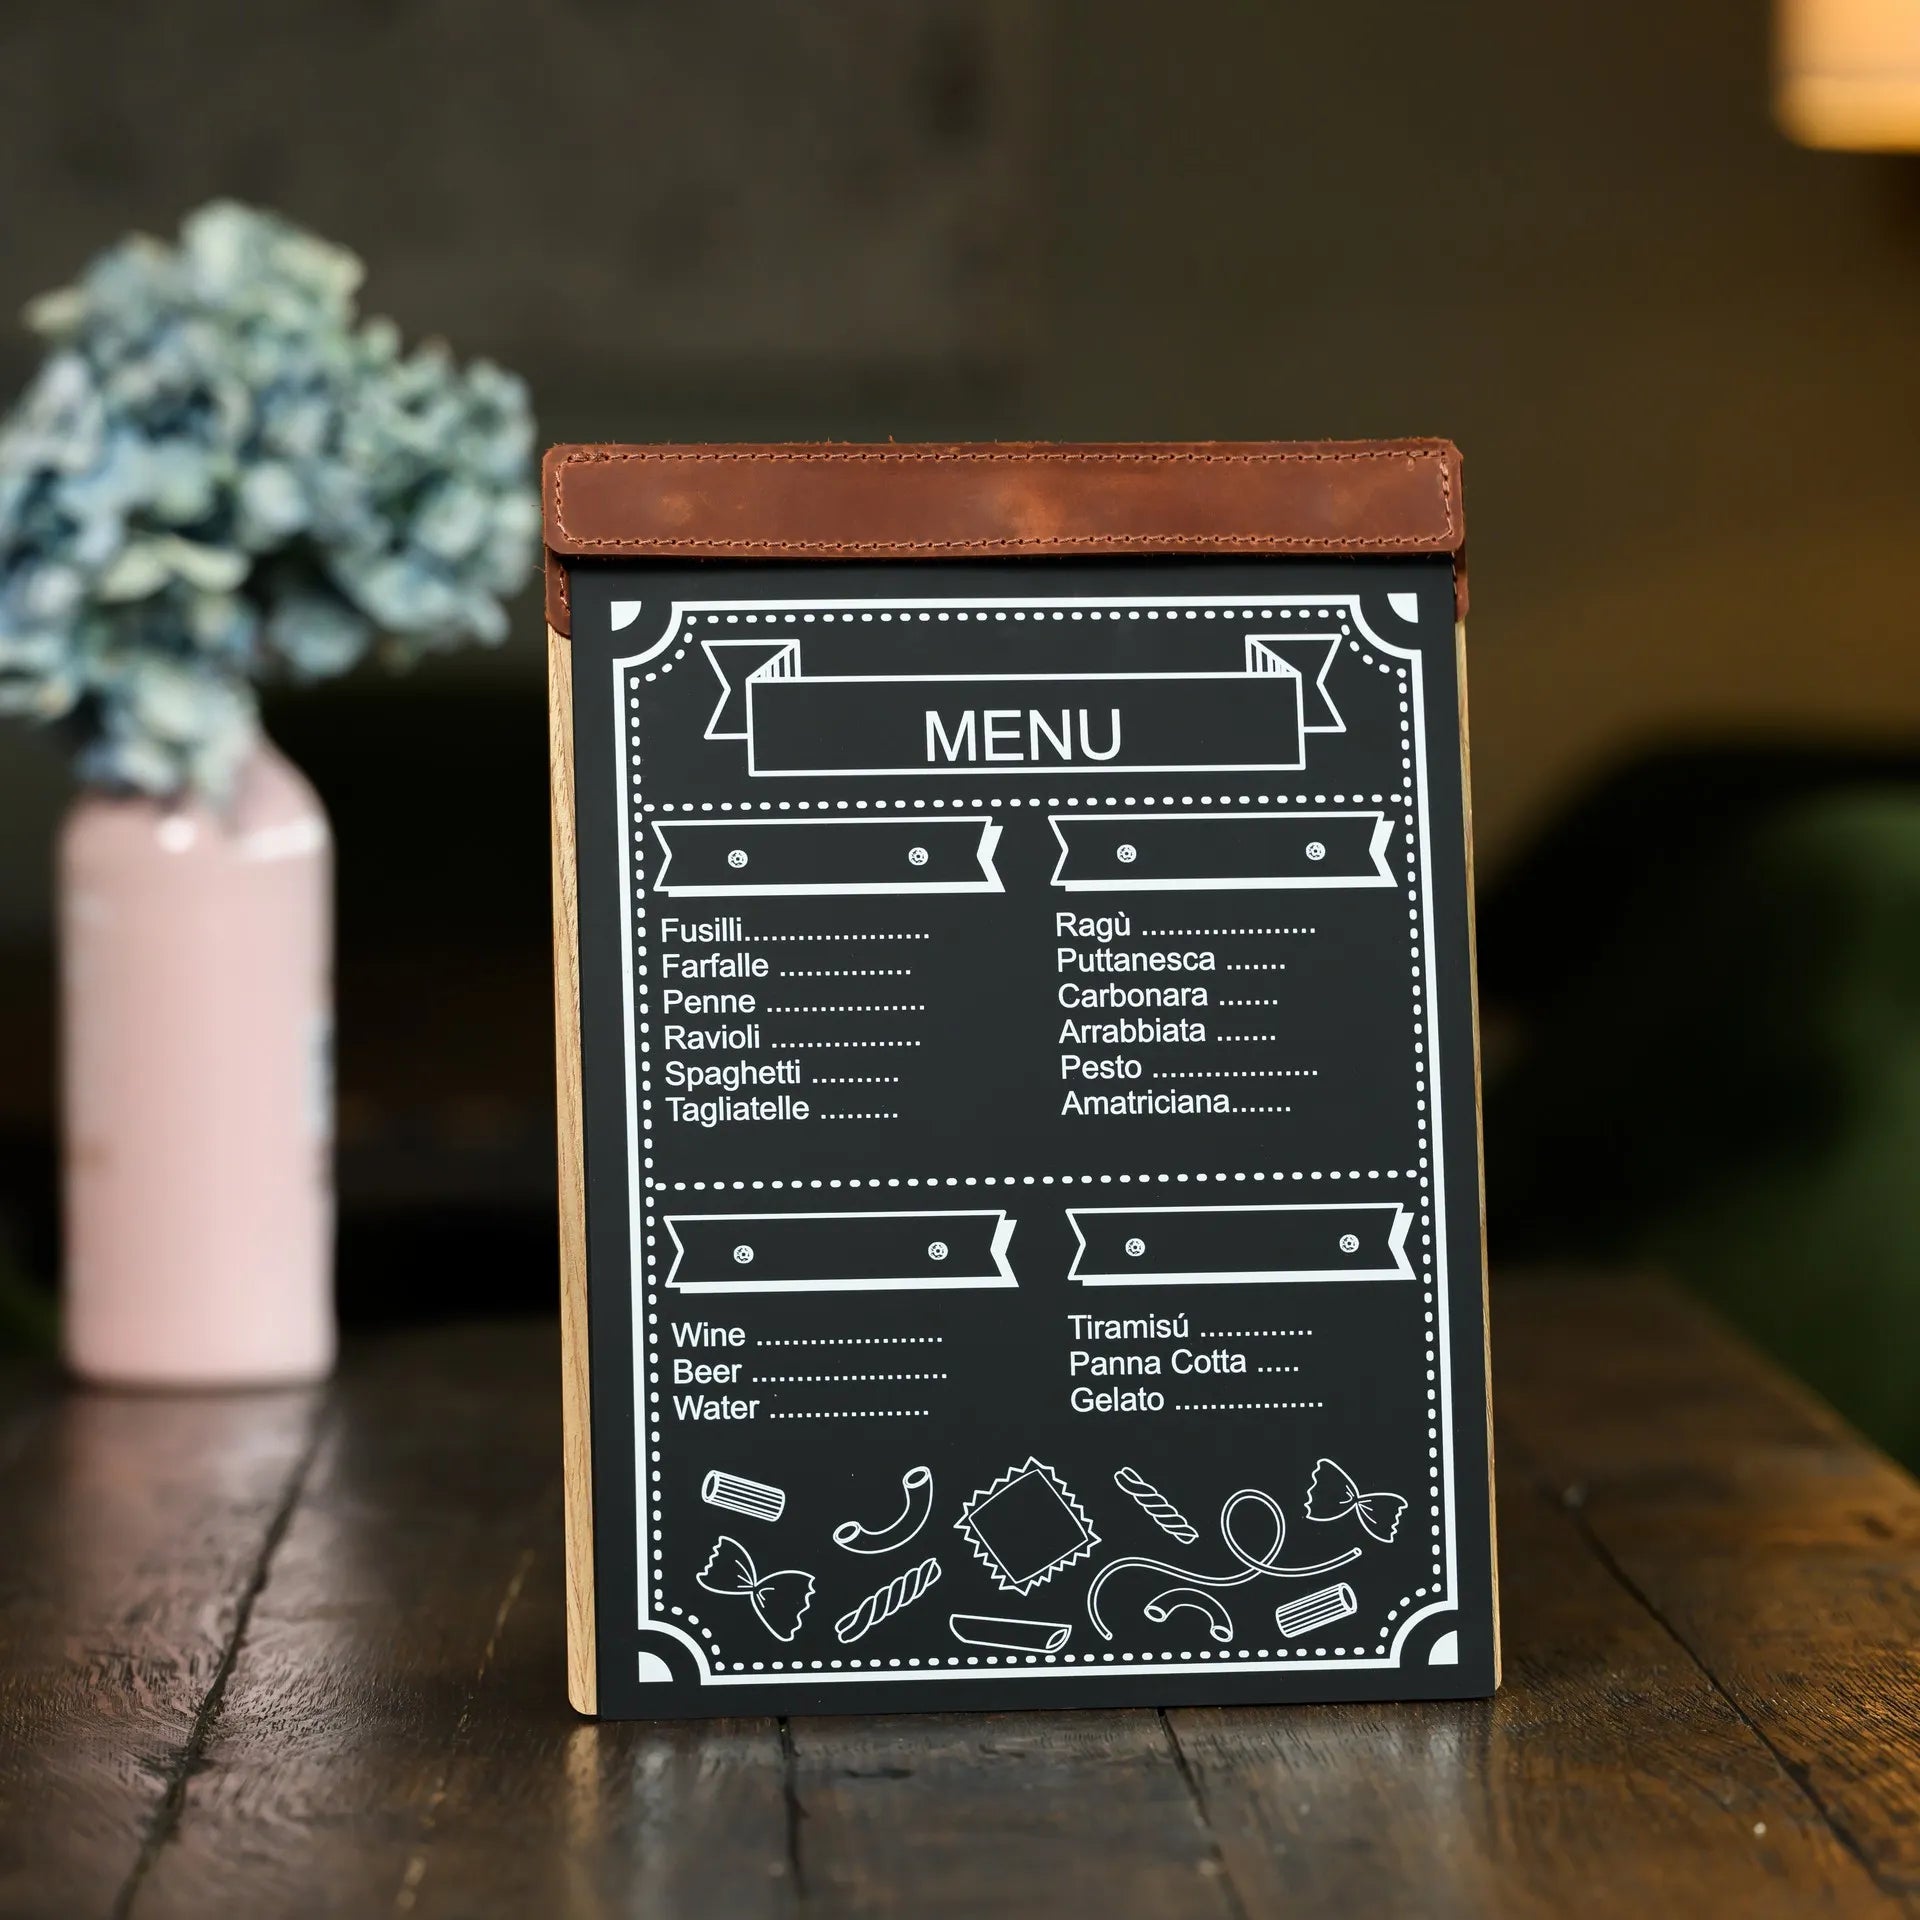 Robust Menu Display: Offers durability and style for your menu presentation.